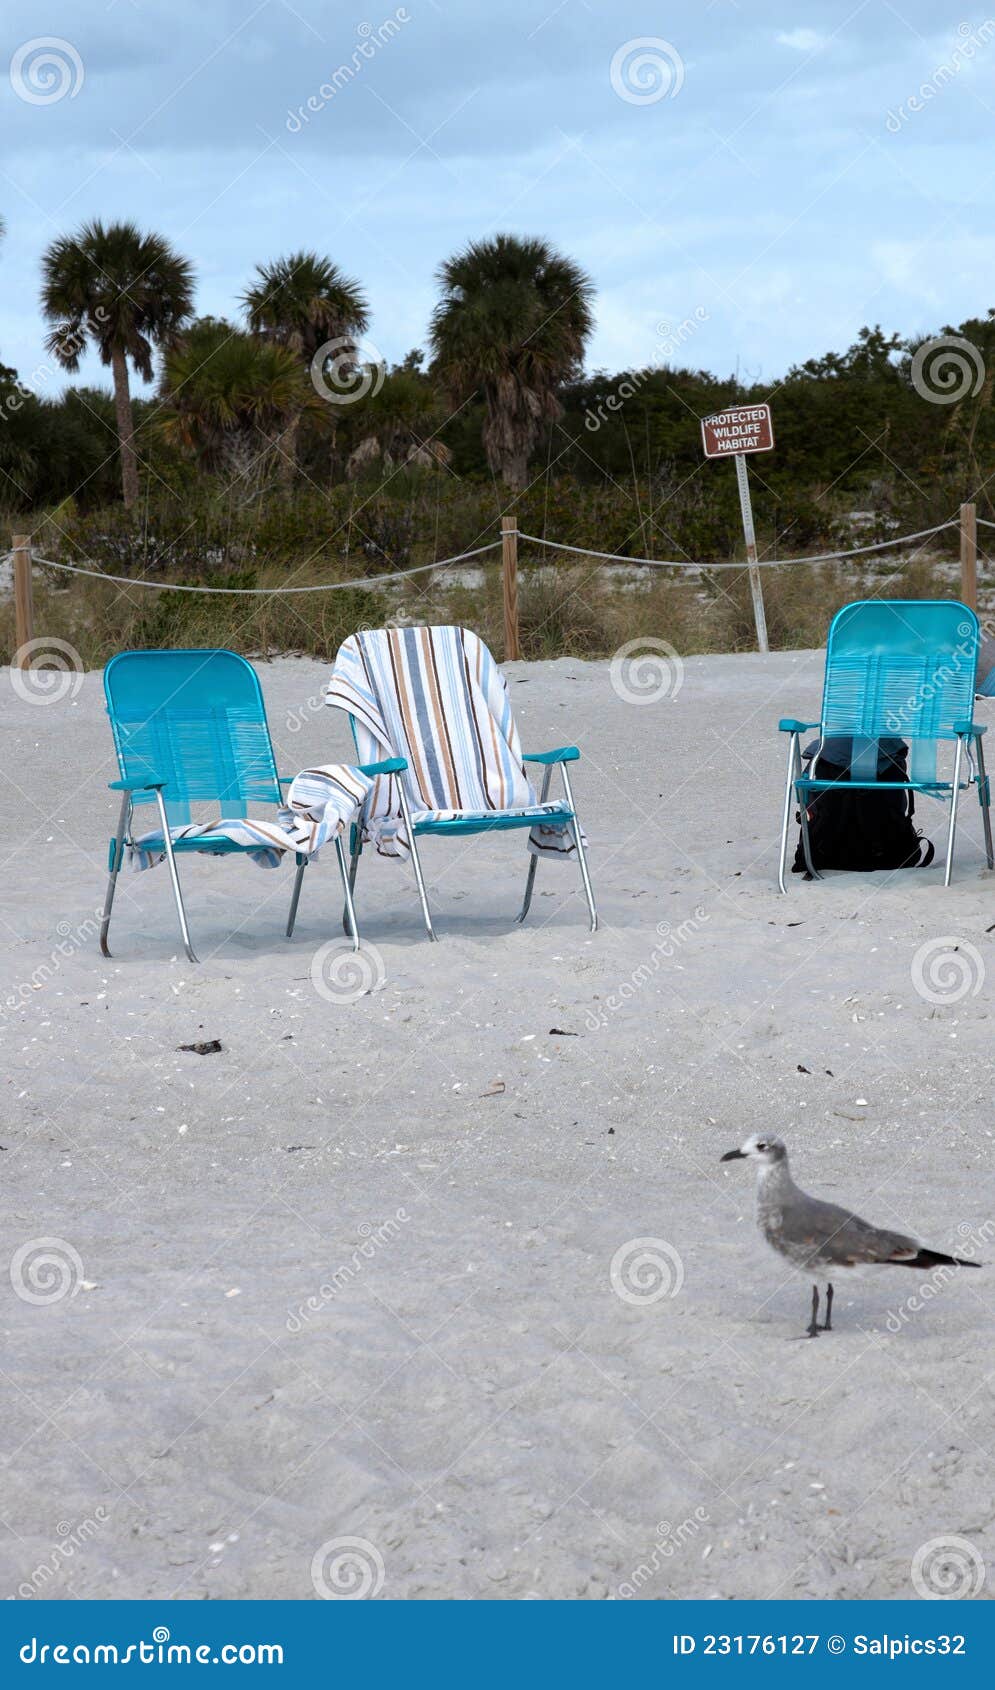 Royalty Free Stock Photography: Three empty deck chairs